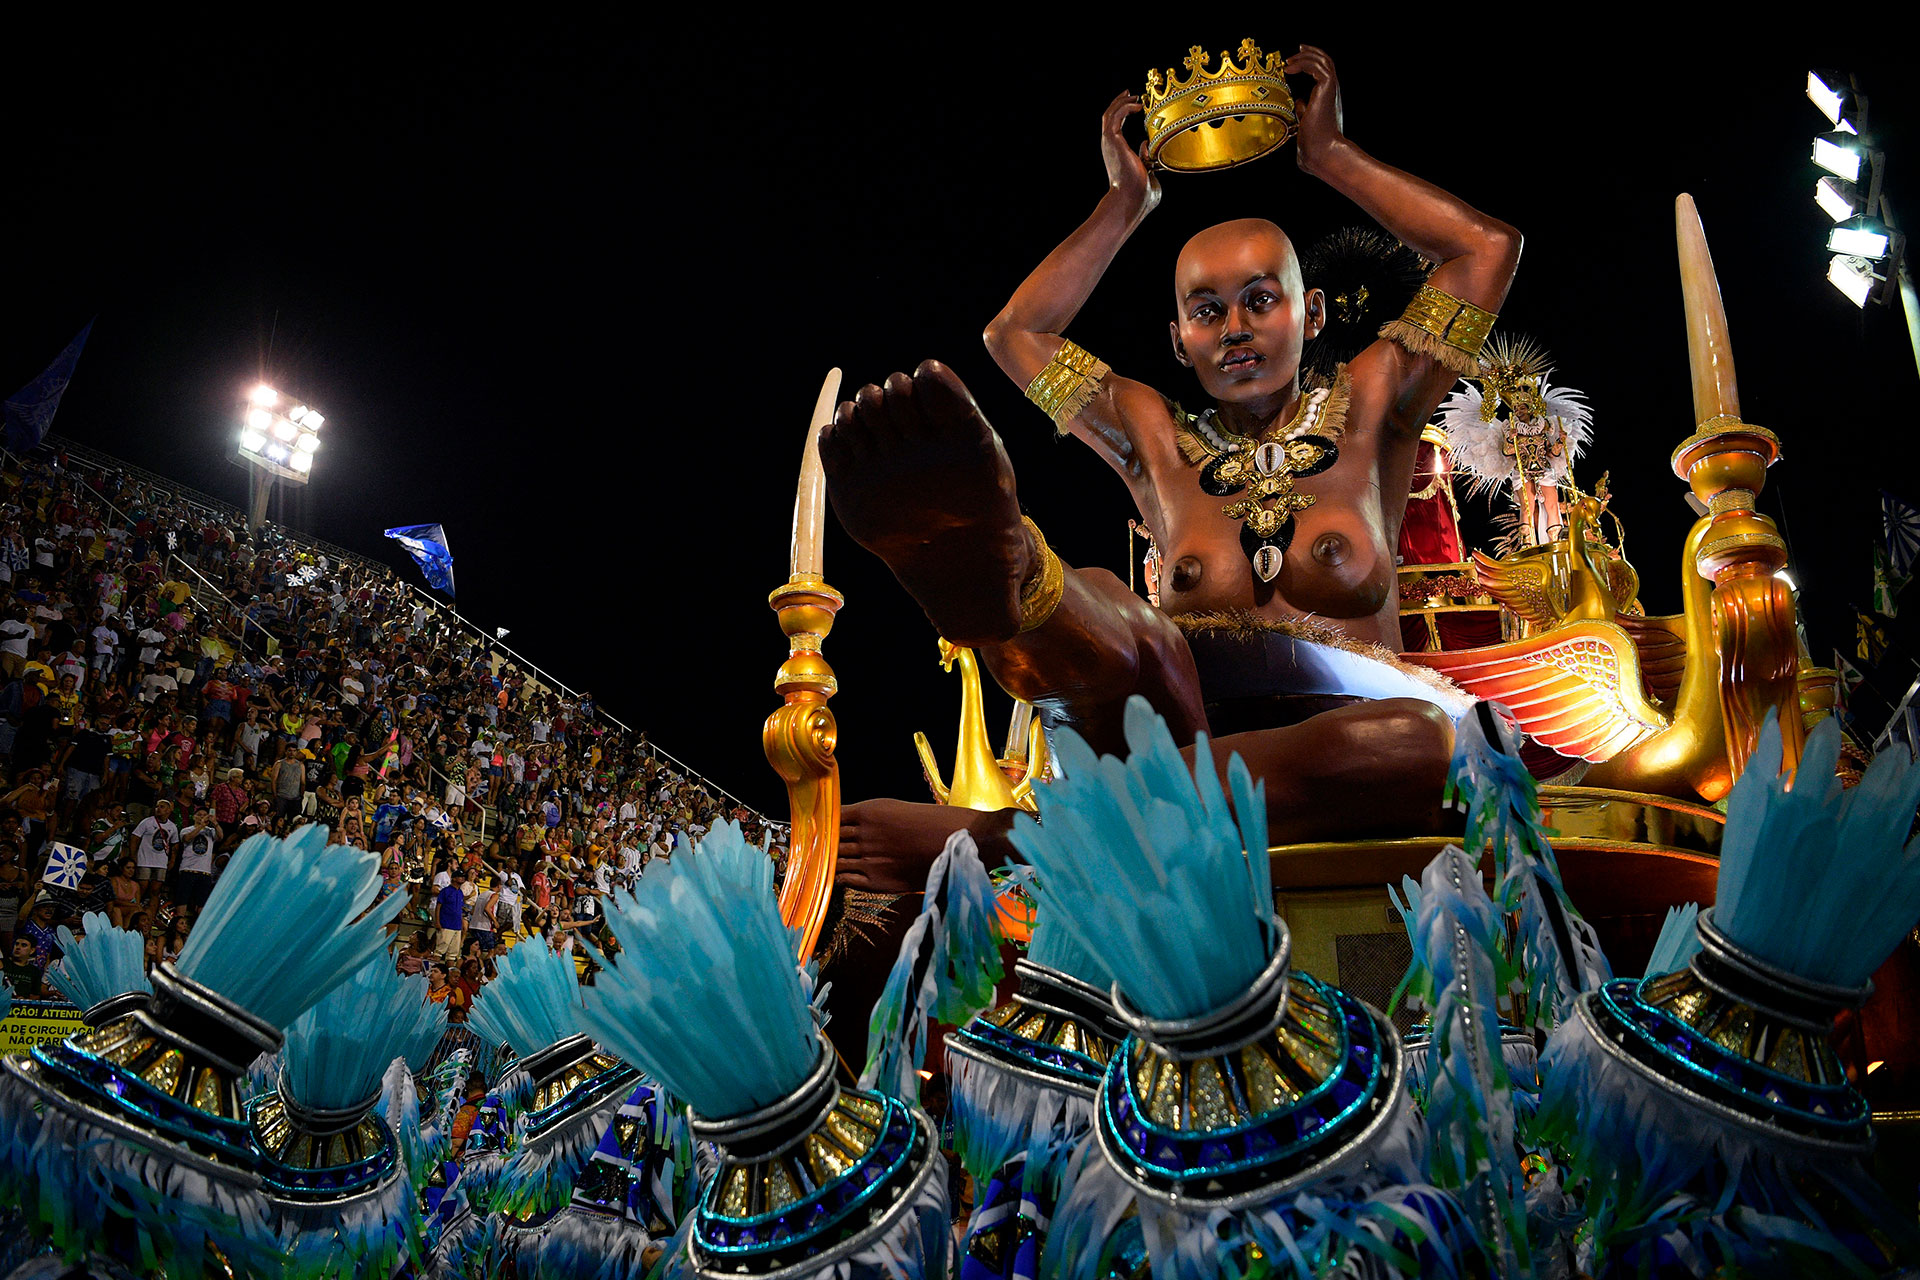 A float from the Beija Flor samba school is seen during the first night of the Rio Carnival